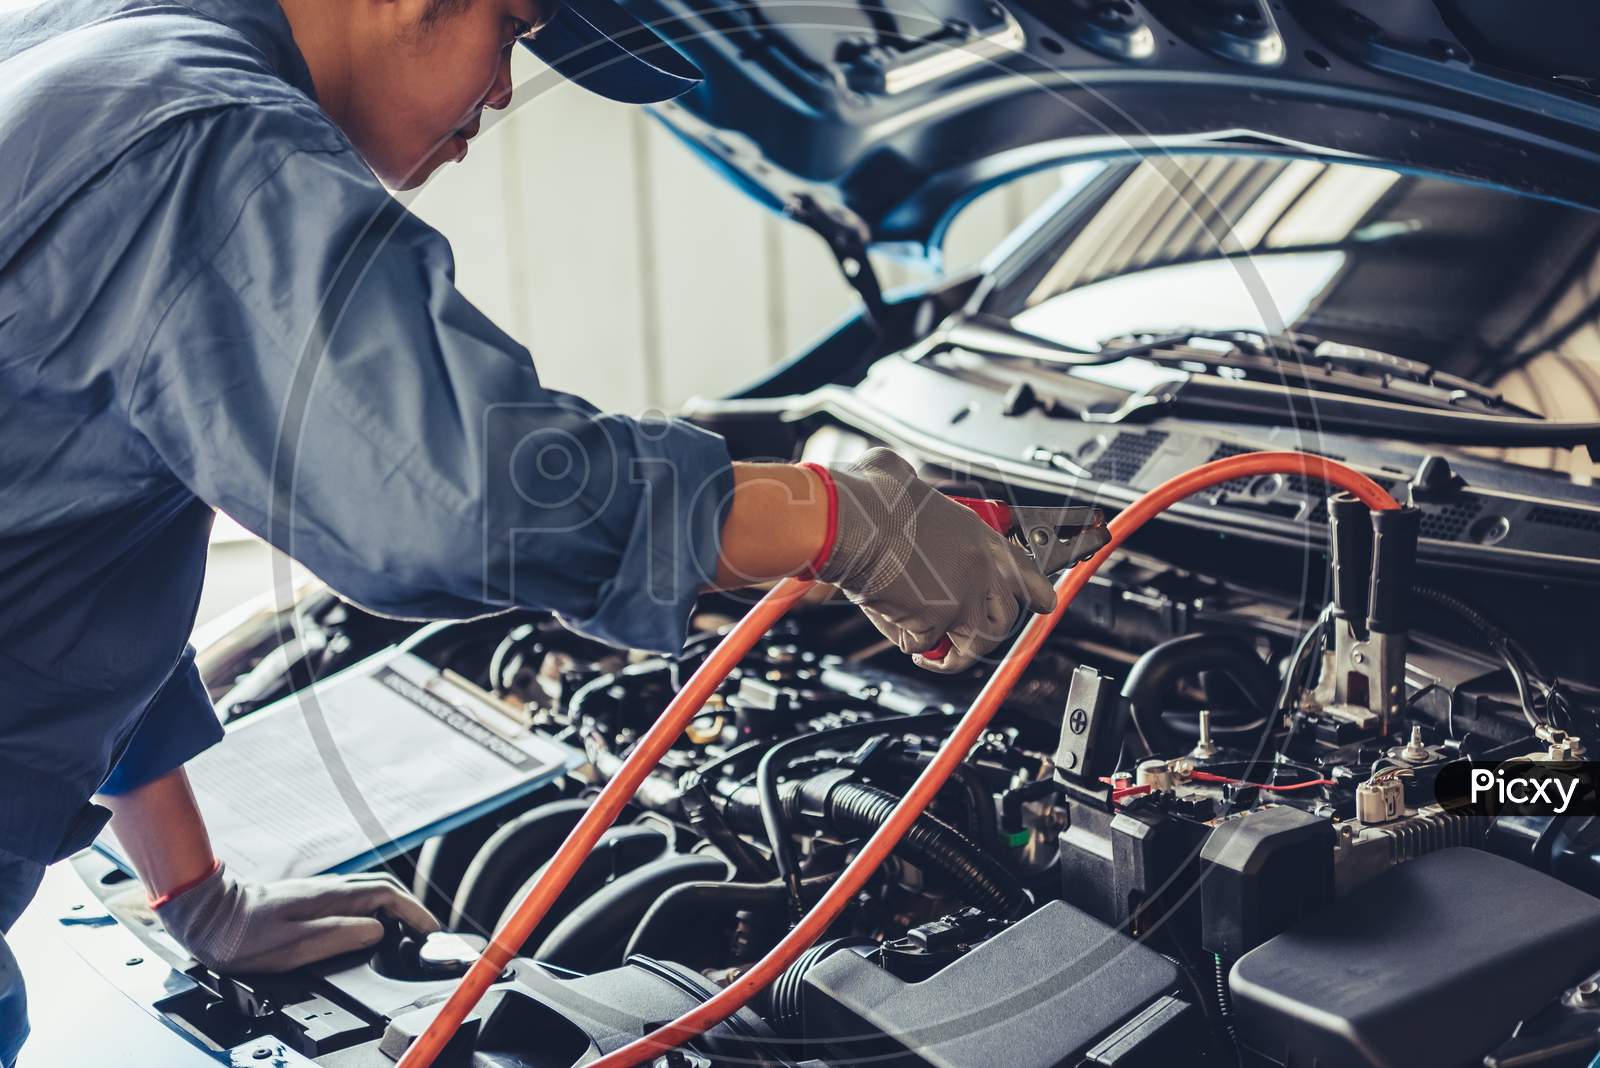 Car Mechanic Holding Battery Electricity Trough Cables Jumper And Checking To Maintenance Vehicle By Customer Claim Order In Auto Repair Shop Garage. Repair Service. People Occupation And Business Job